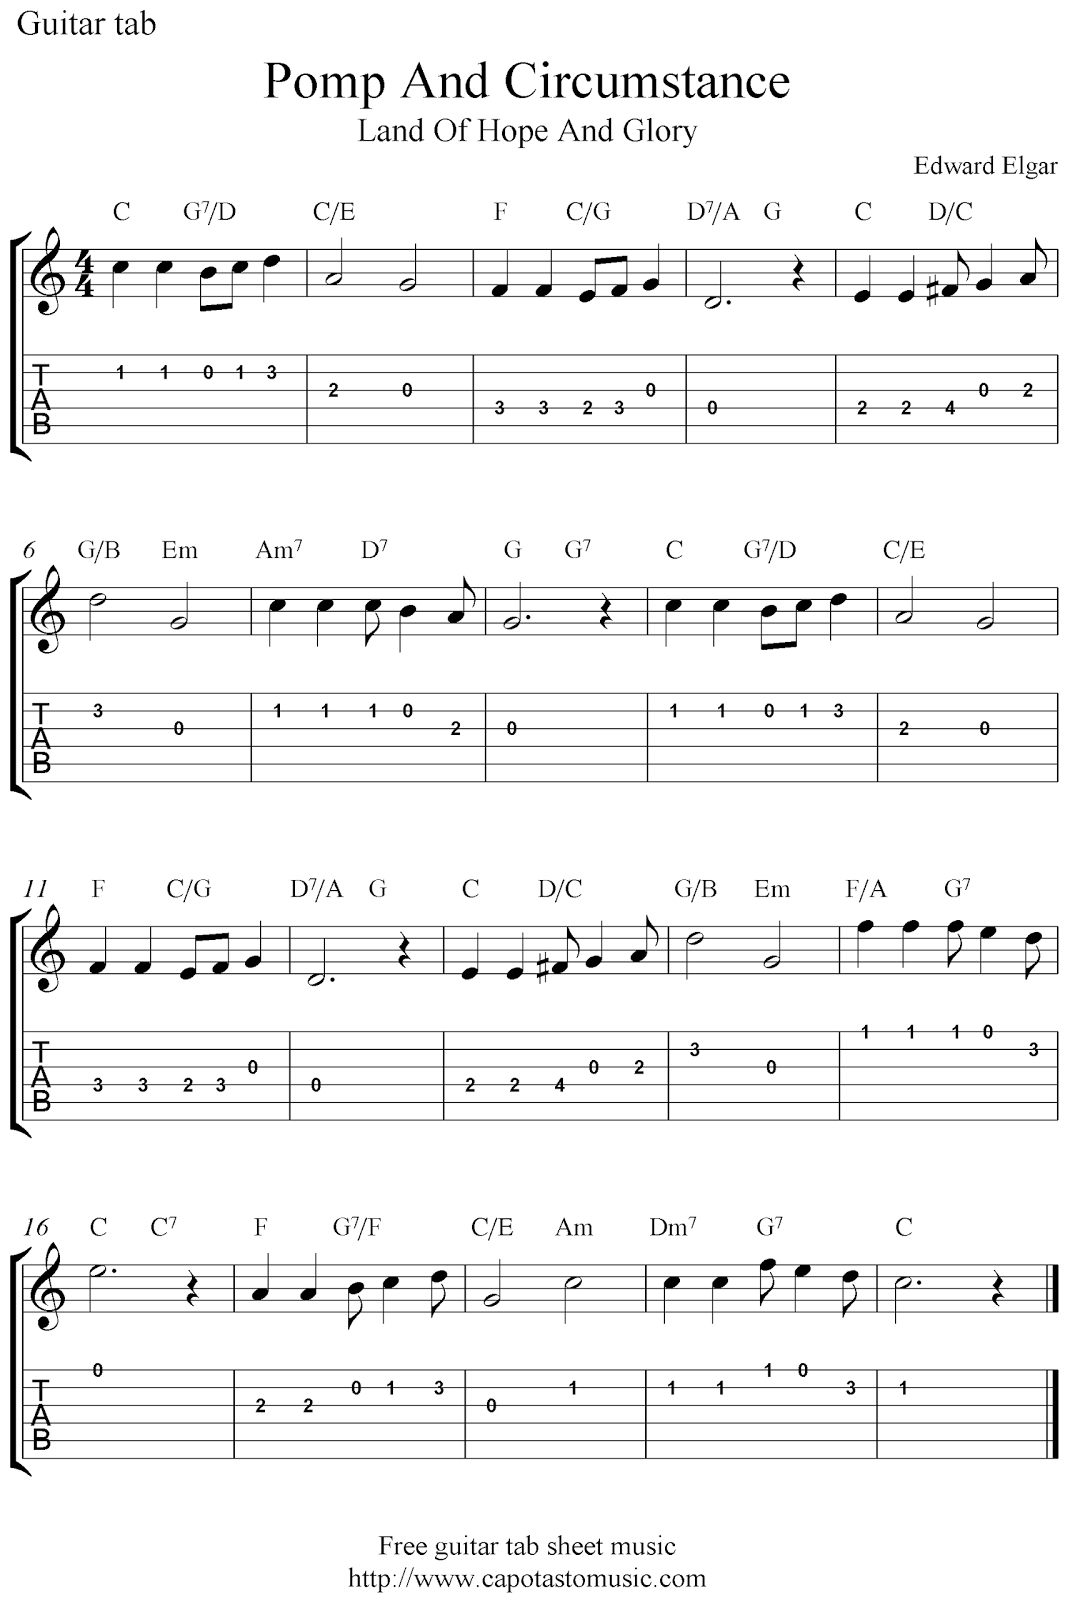 Free Easy Guitar Tablature Sheet Music Score, Land Of Hope And Glory - Free Printable Sheet Music Pomp And Circumstance